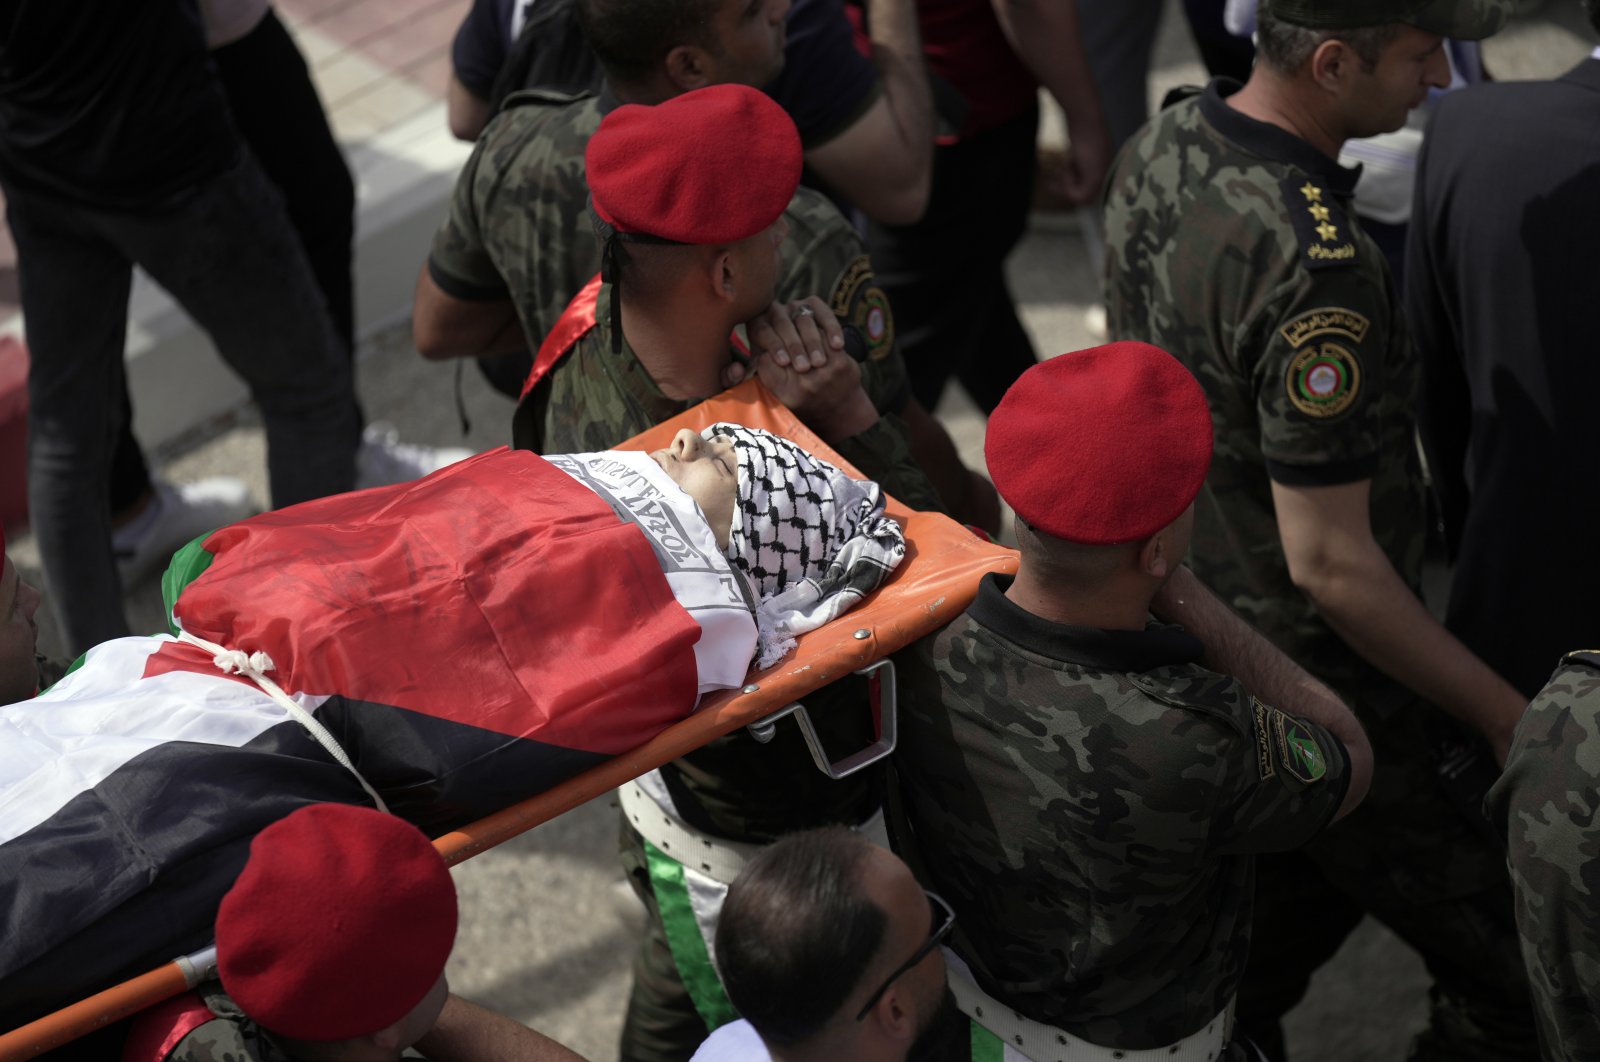 Slain Al-Jazeera veteran journalist Shireen Abu Akleh is carried by a Palestinian honor guard in the city of Nablus, the West Bank, Palestine, Wednesday, May 11, 2022. She was shot and killed while covering an Israeli raid in the occupied West Bank town of Jenin early Wednesday. (AP Photo/Majdi Mohammed)